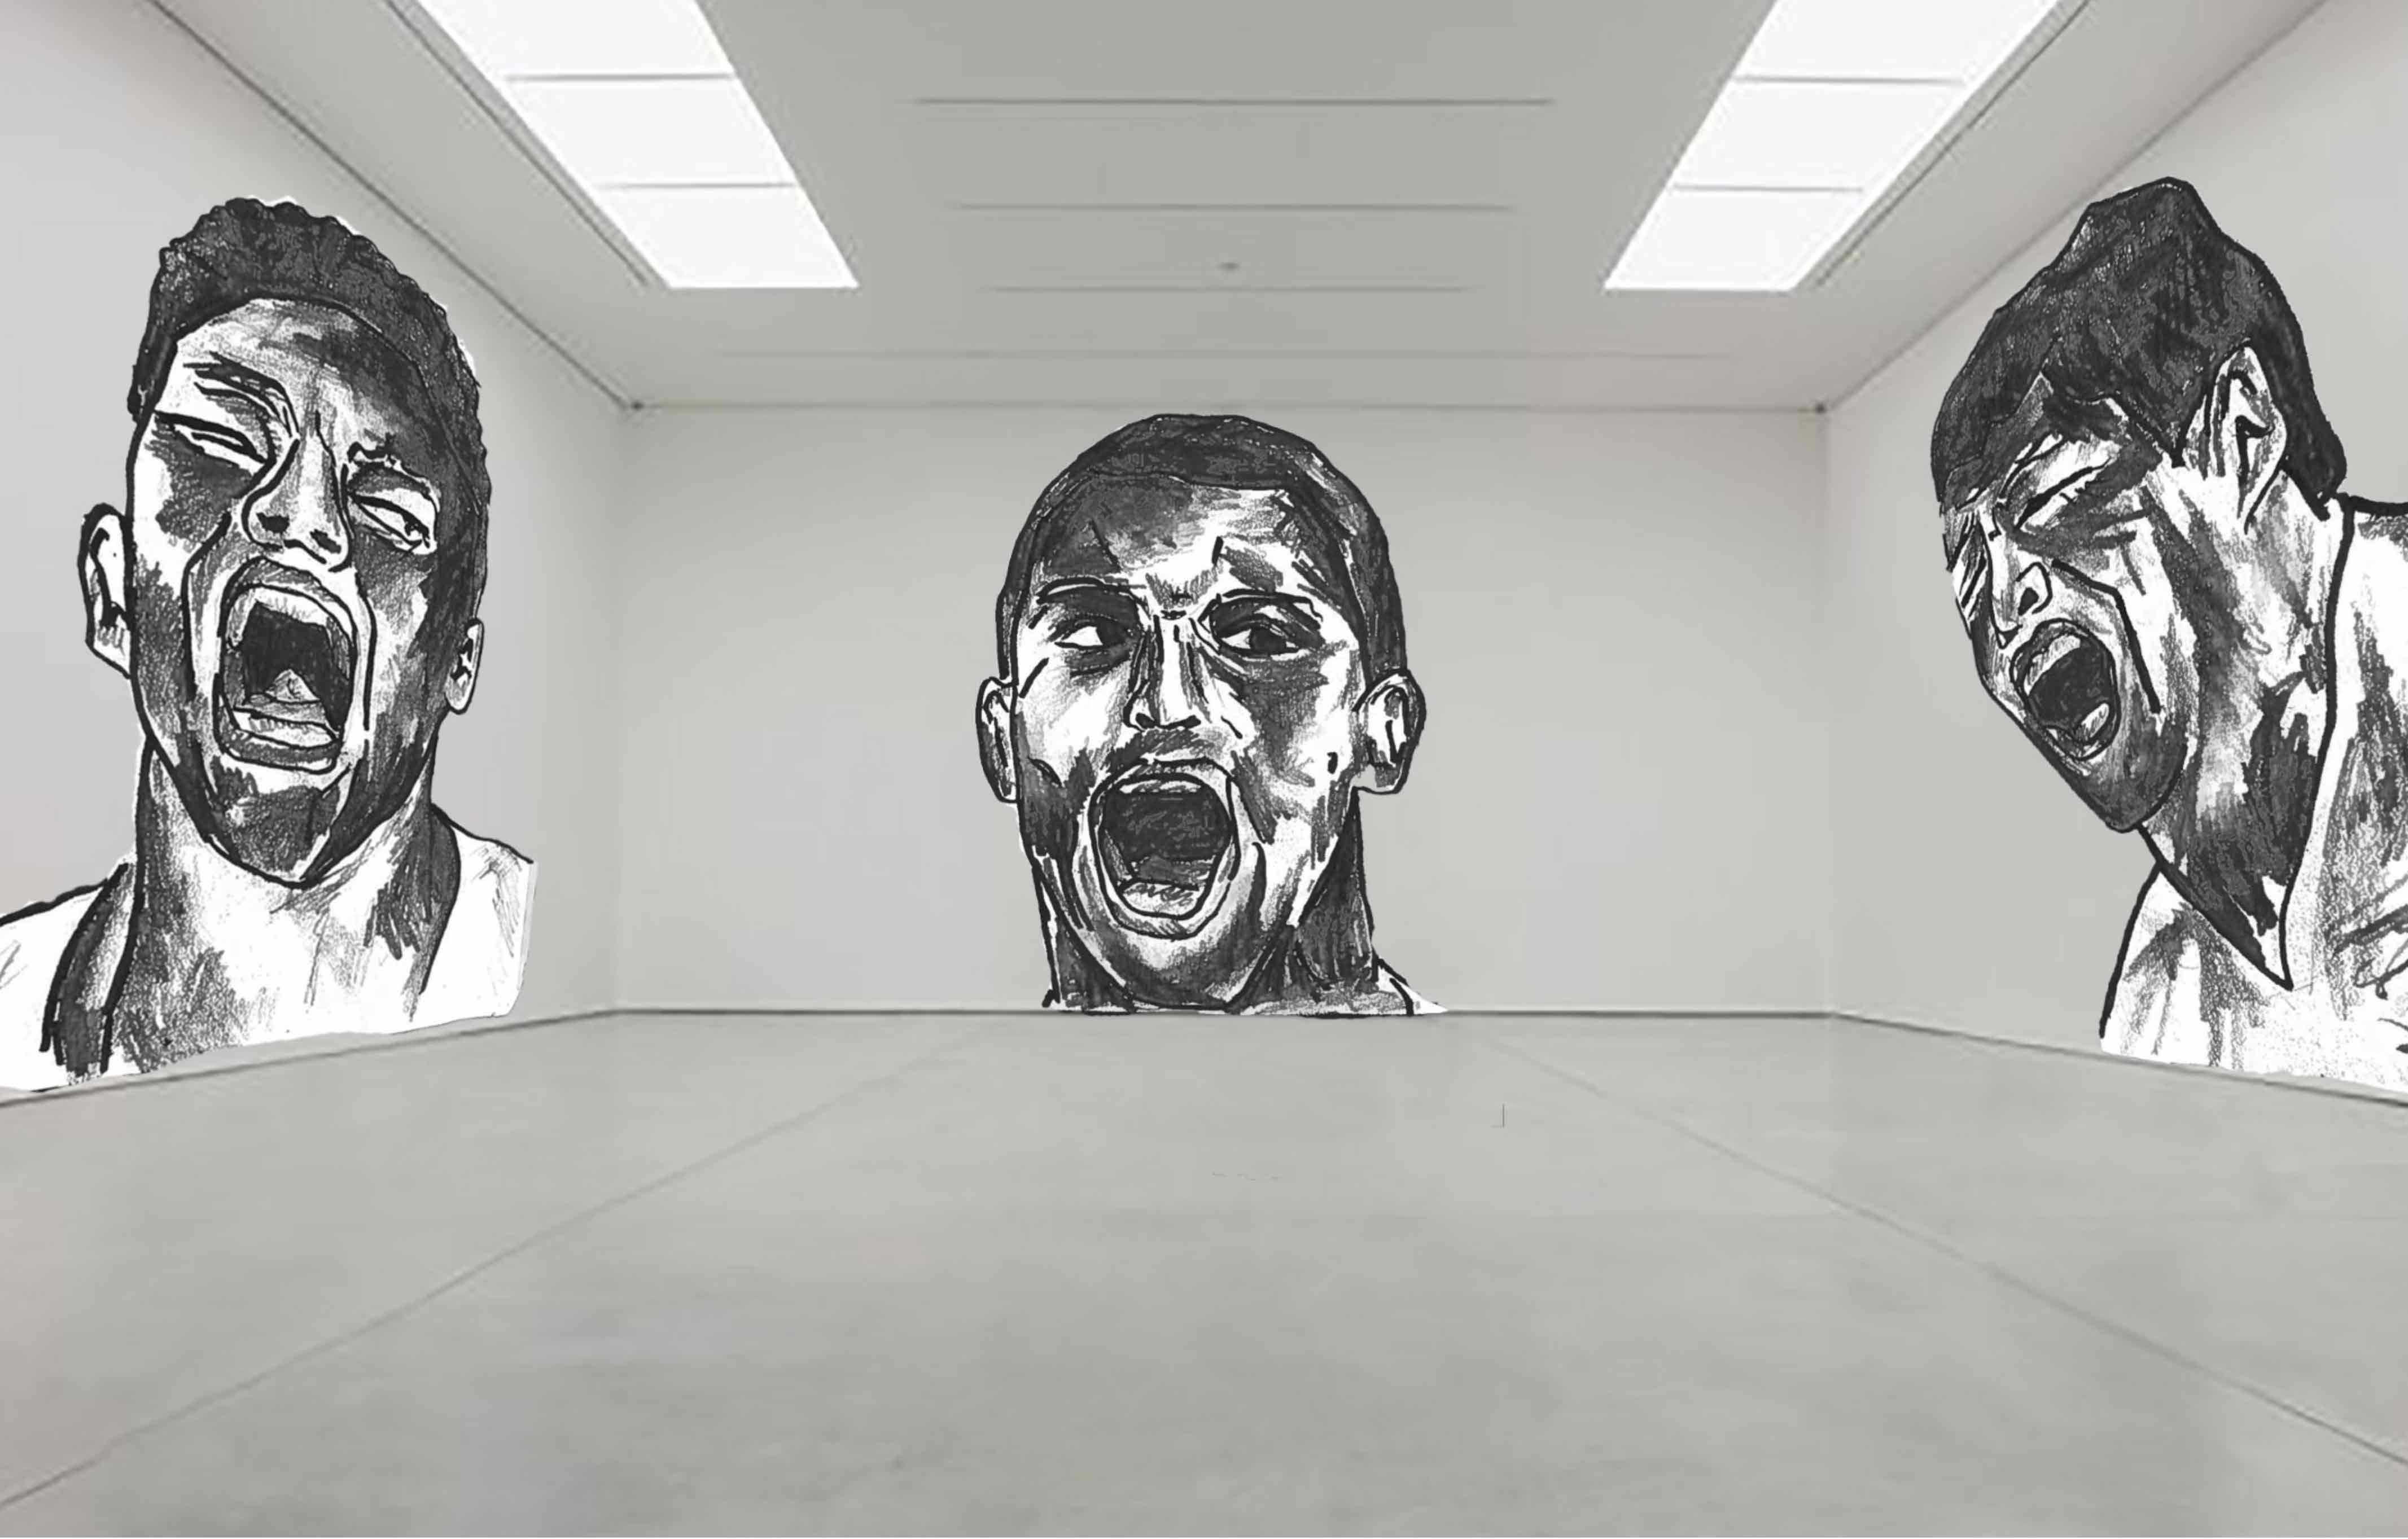 Drawings of Neymar, Ronaldo and Suarez (footballers) proposed in white space gallery. 